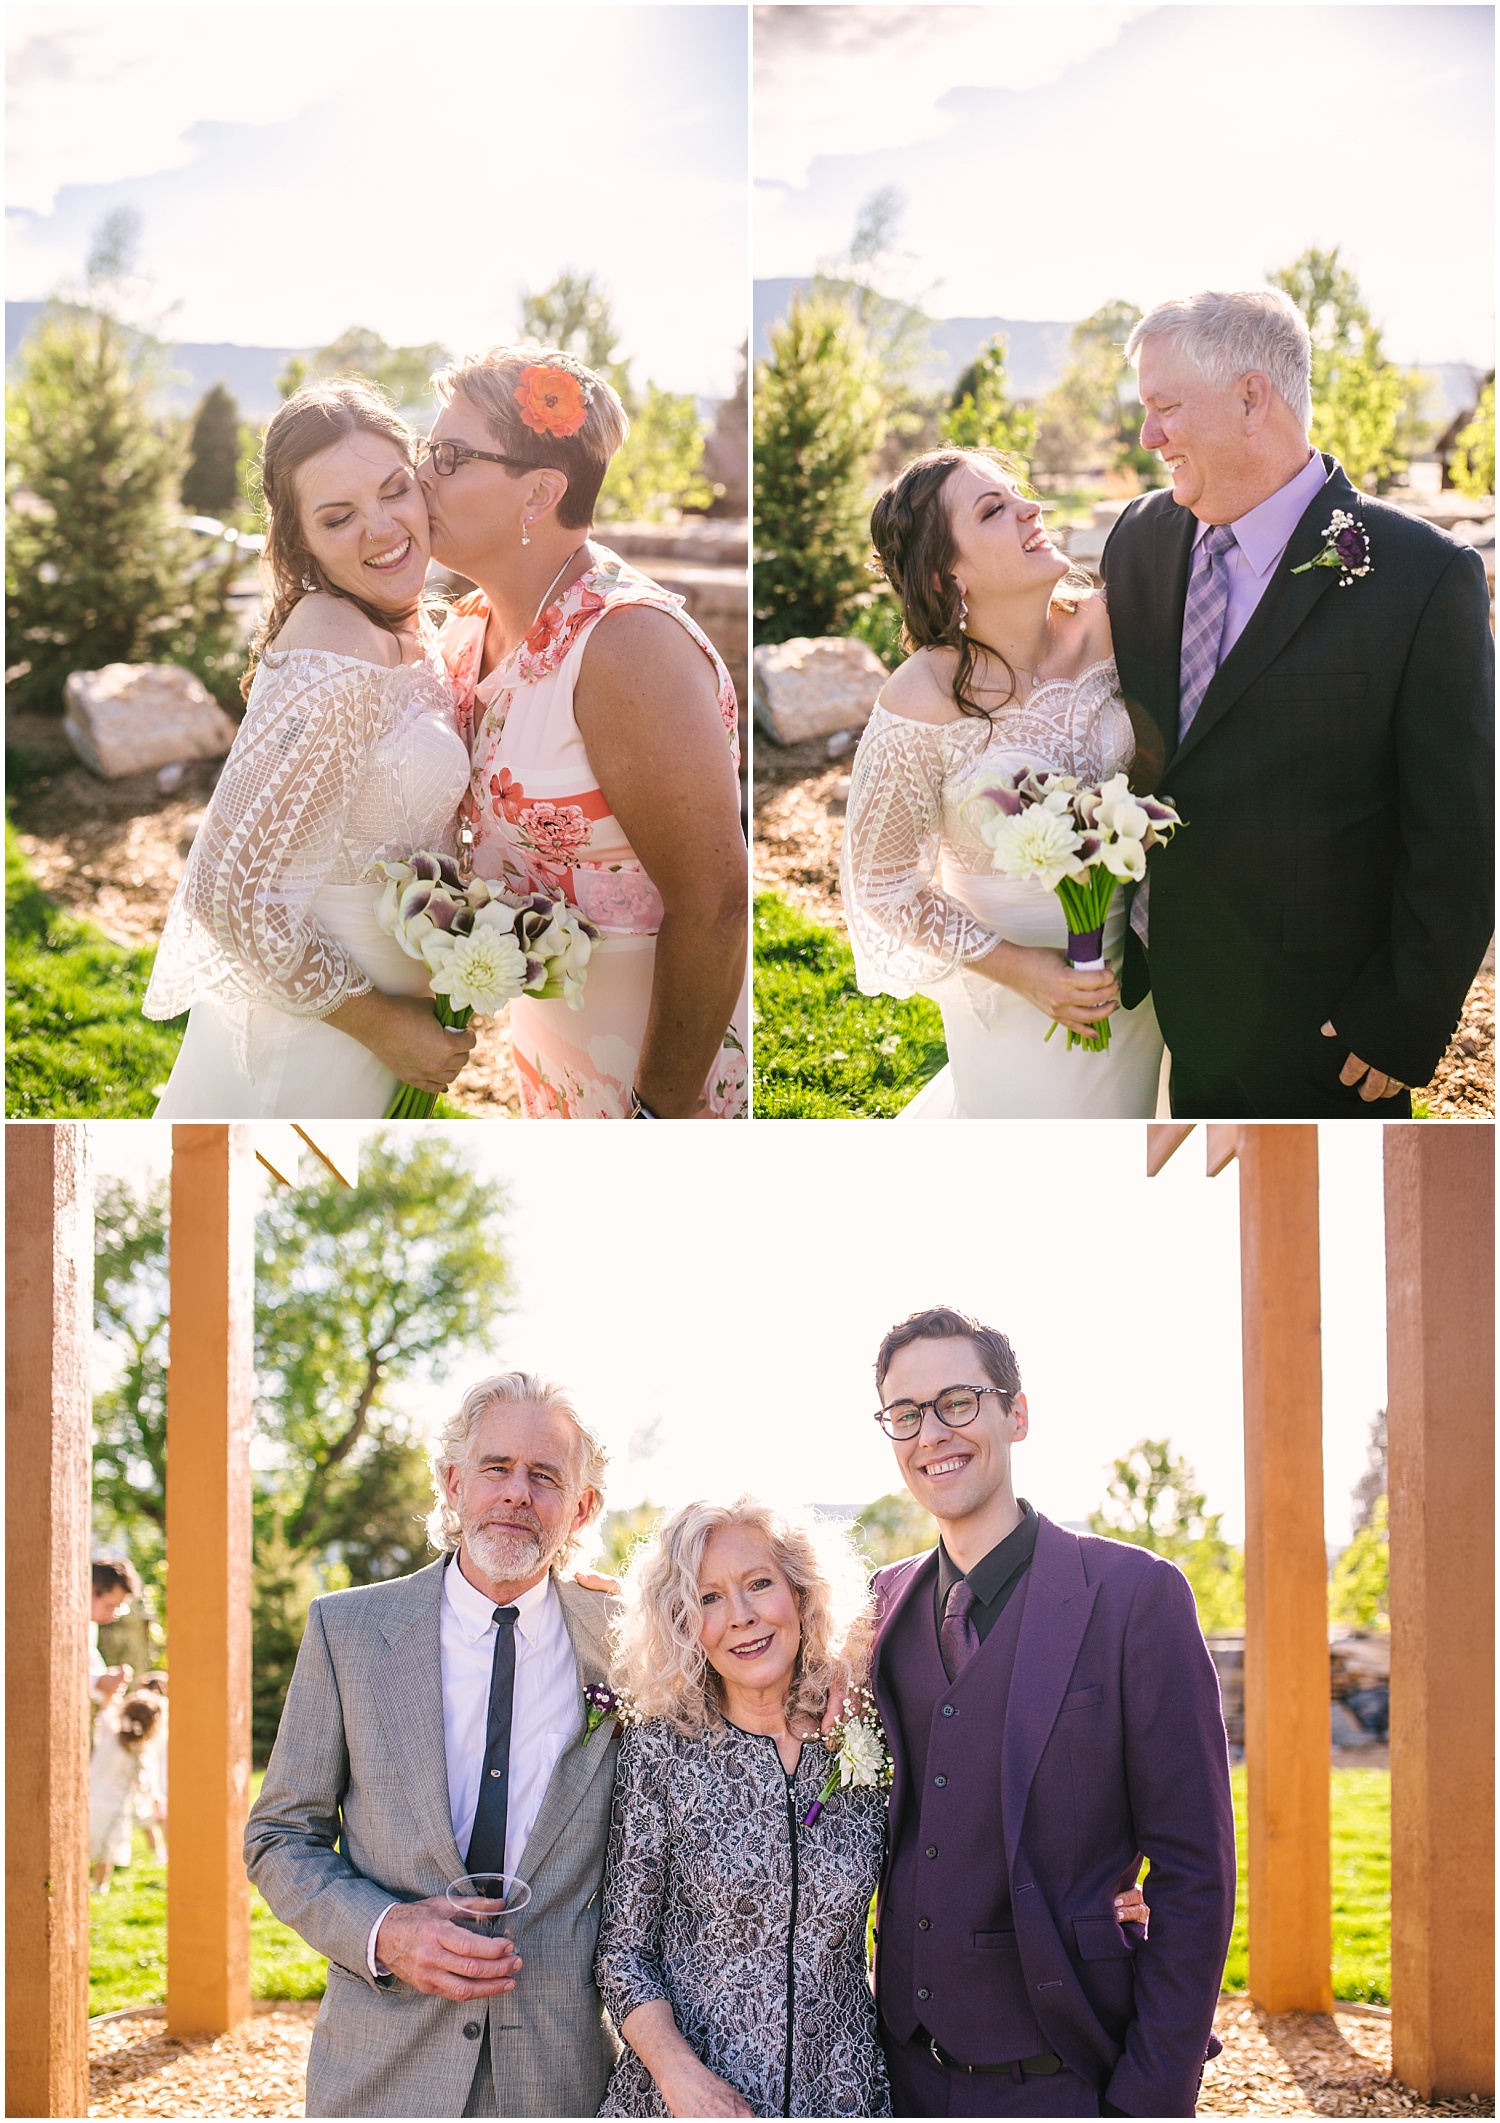 Family portraits at Hearth House Venue wedding in Monument, Colorado